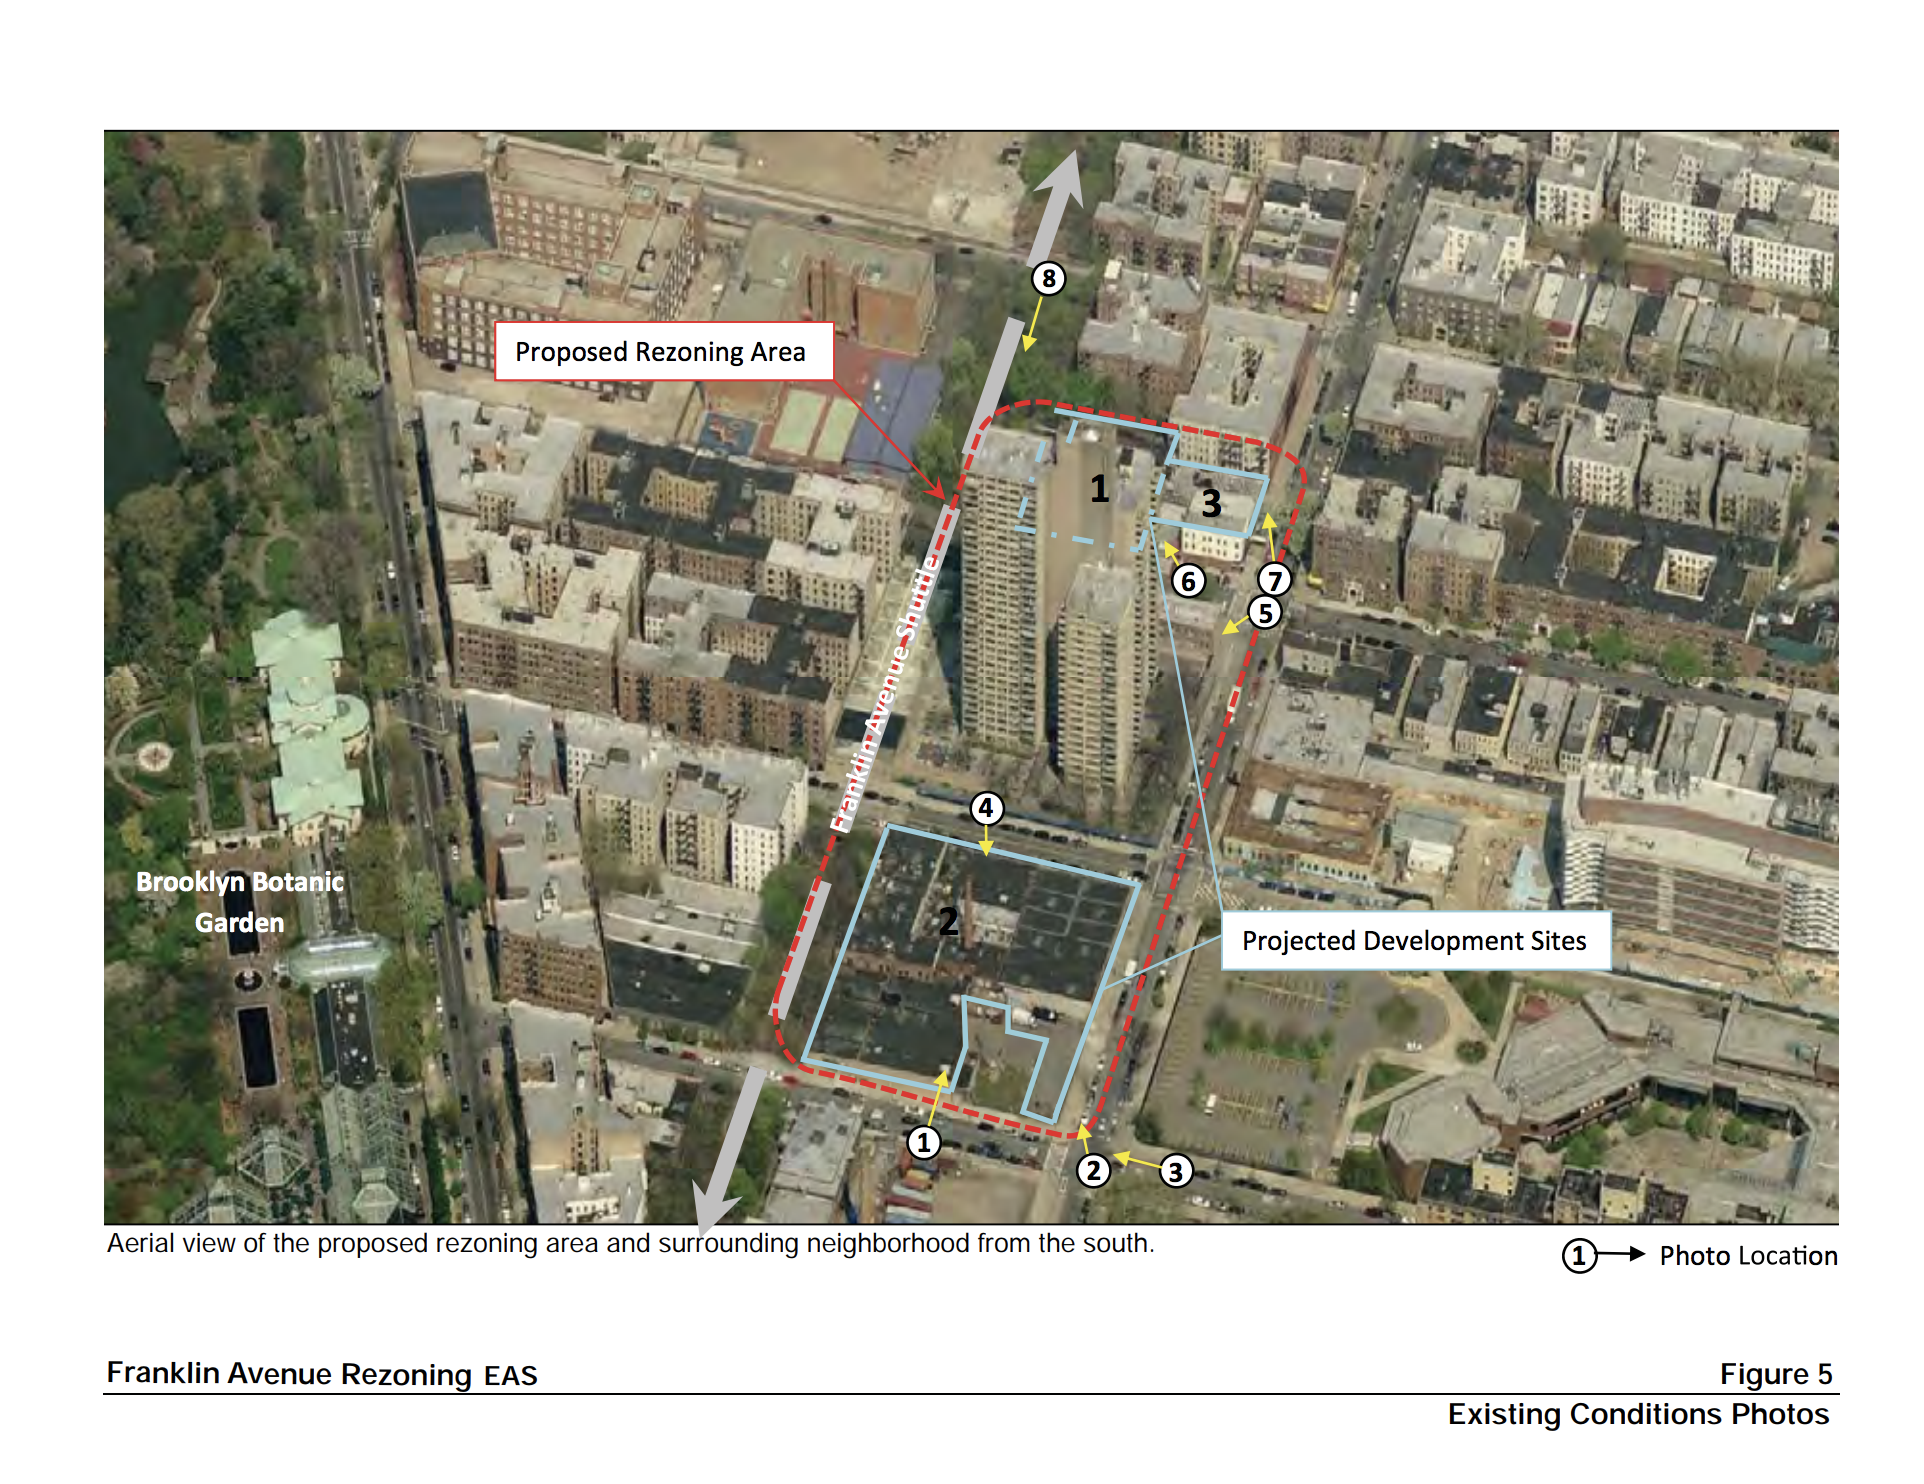 Franklin Avenue Rezoning On It’s Way to A ‘Yes’ Vote From City Council With Three Buildings